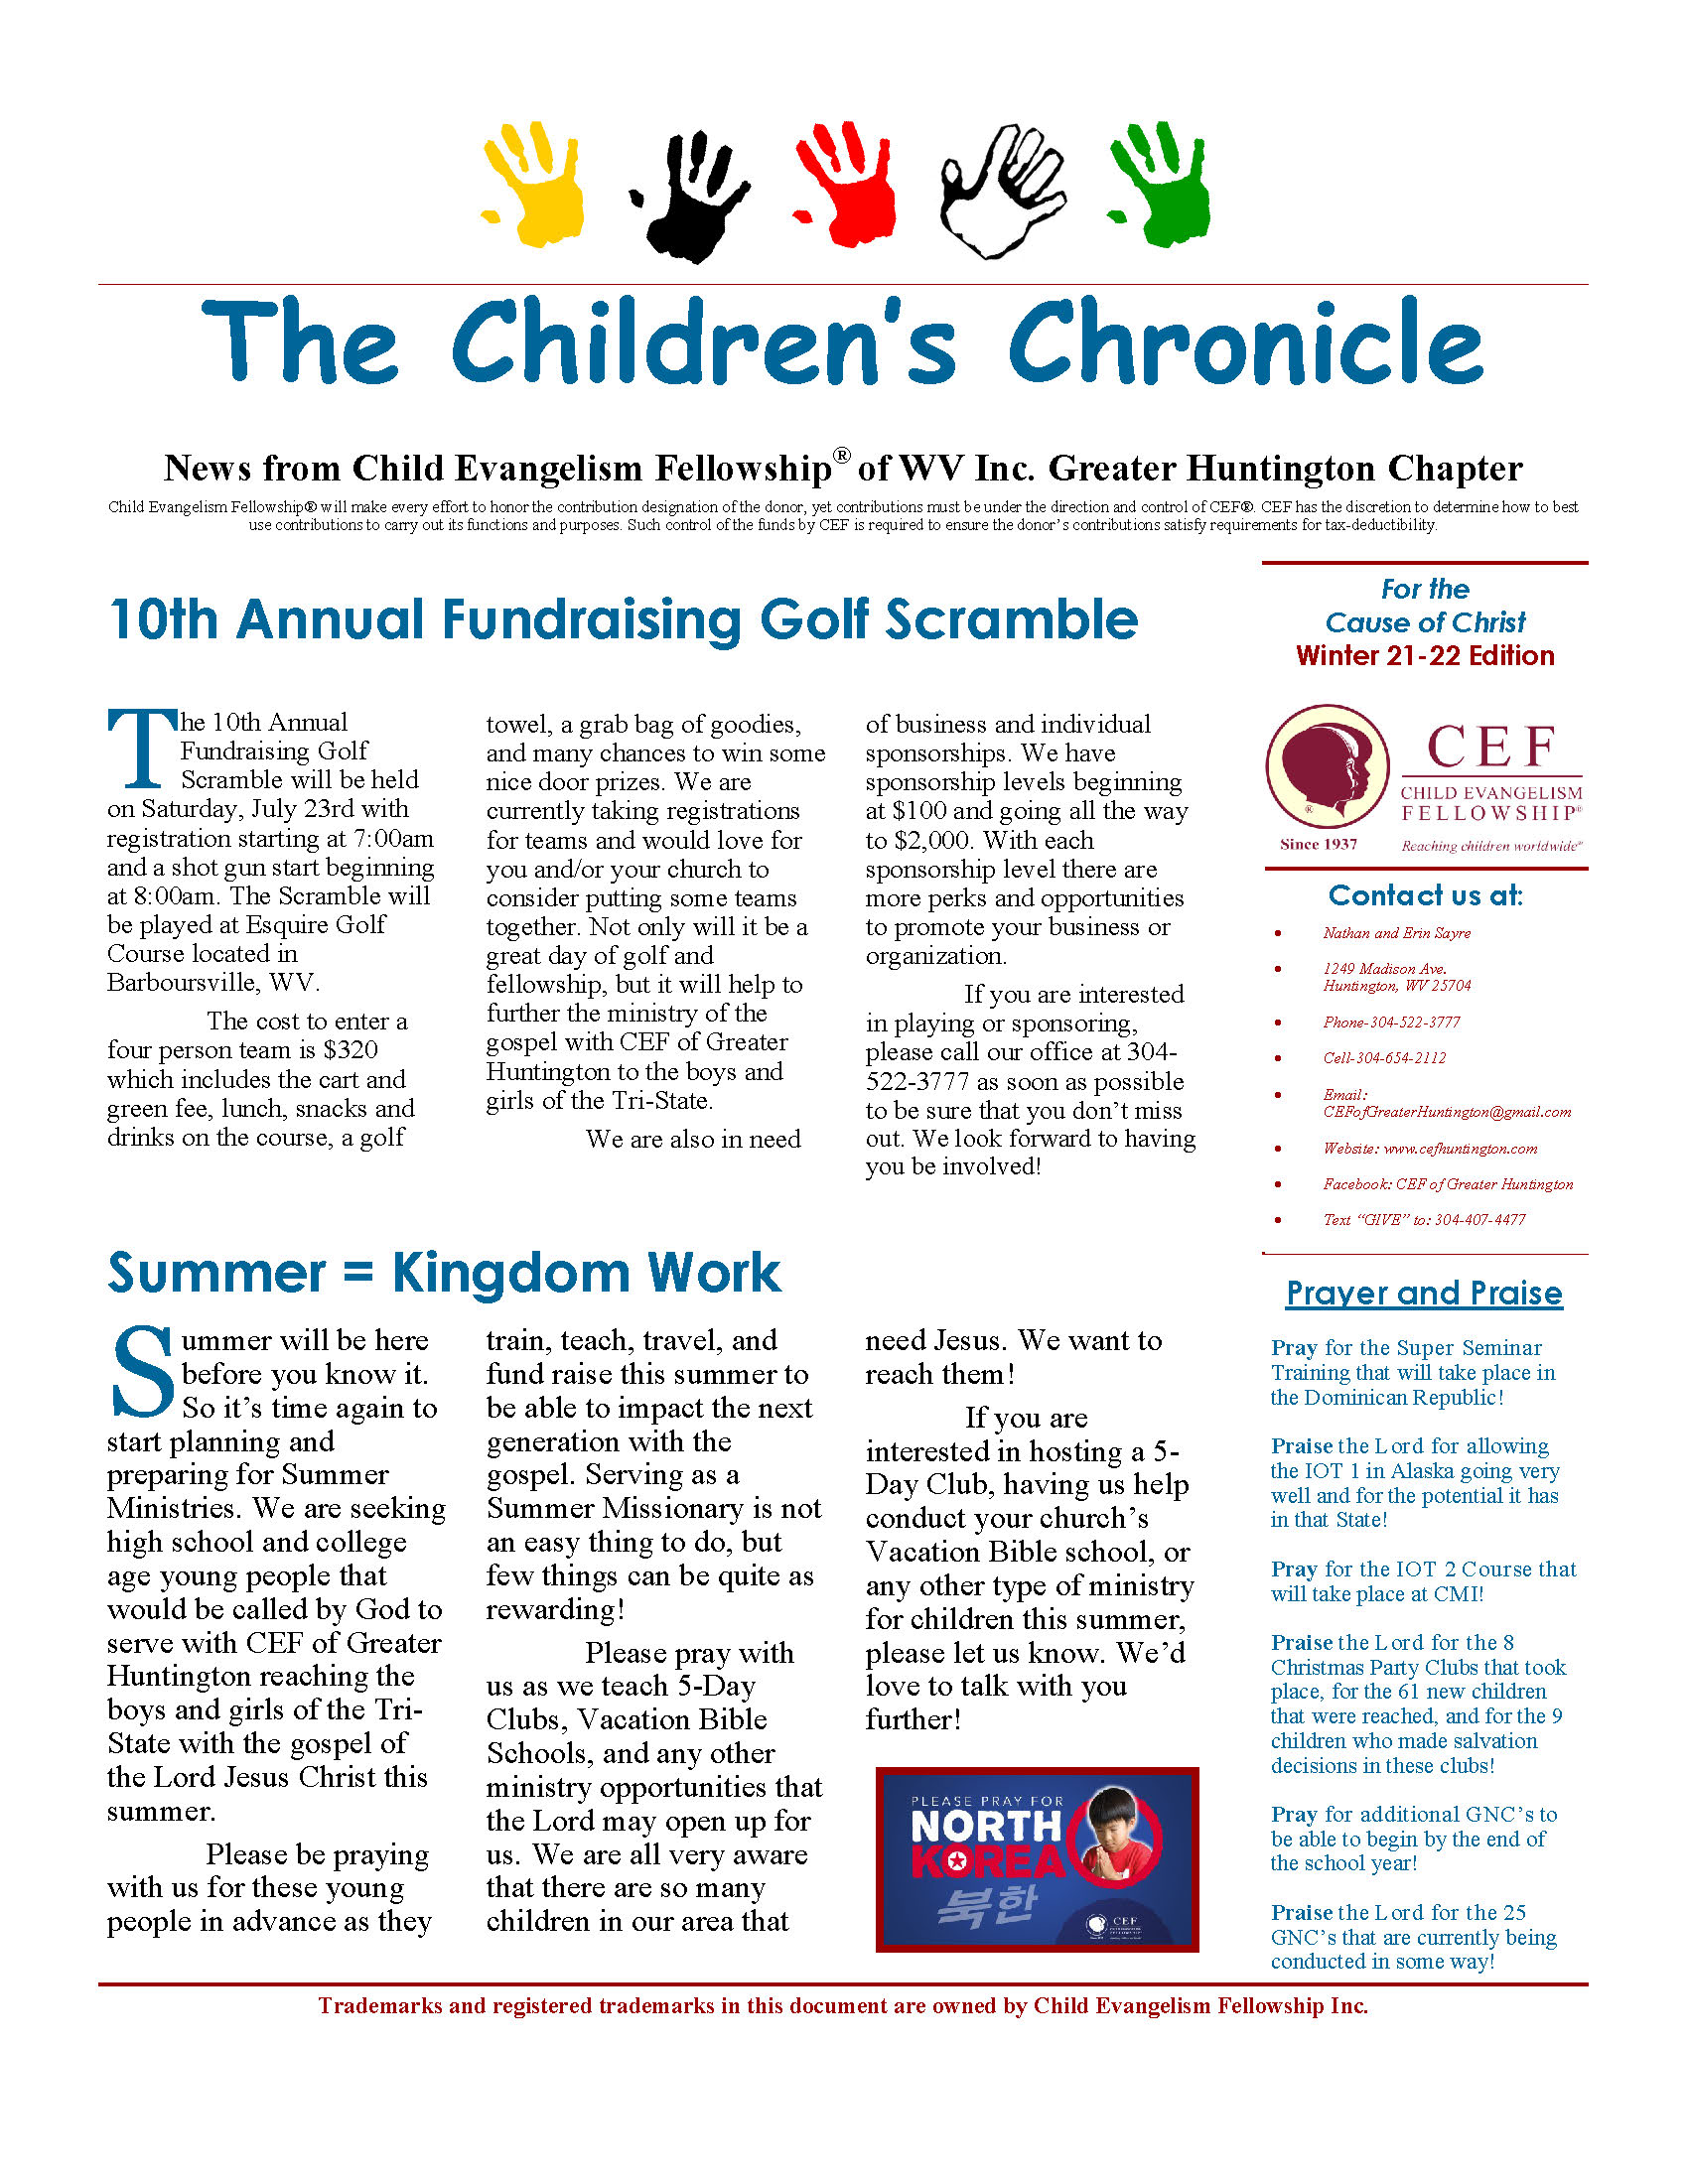 Page one of Winter 2021-2022 Newsletter